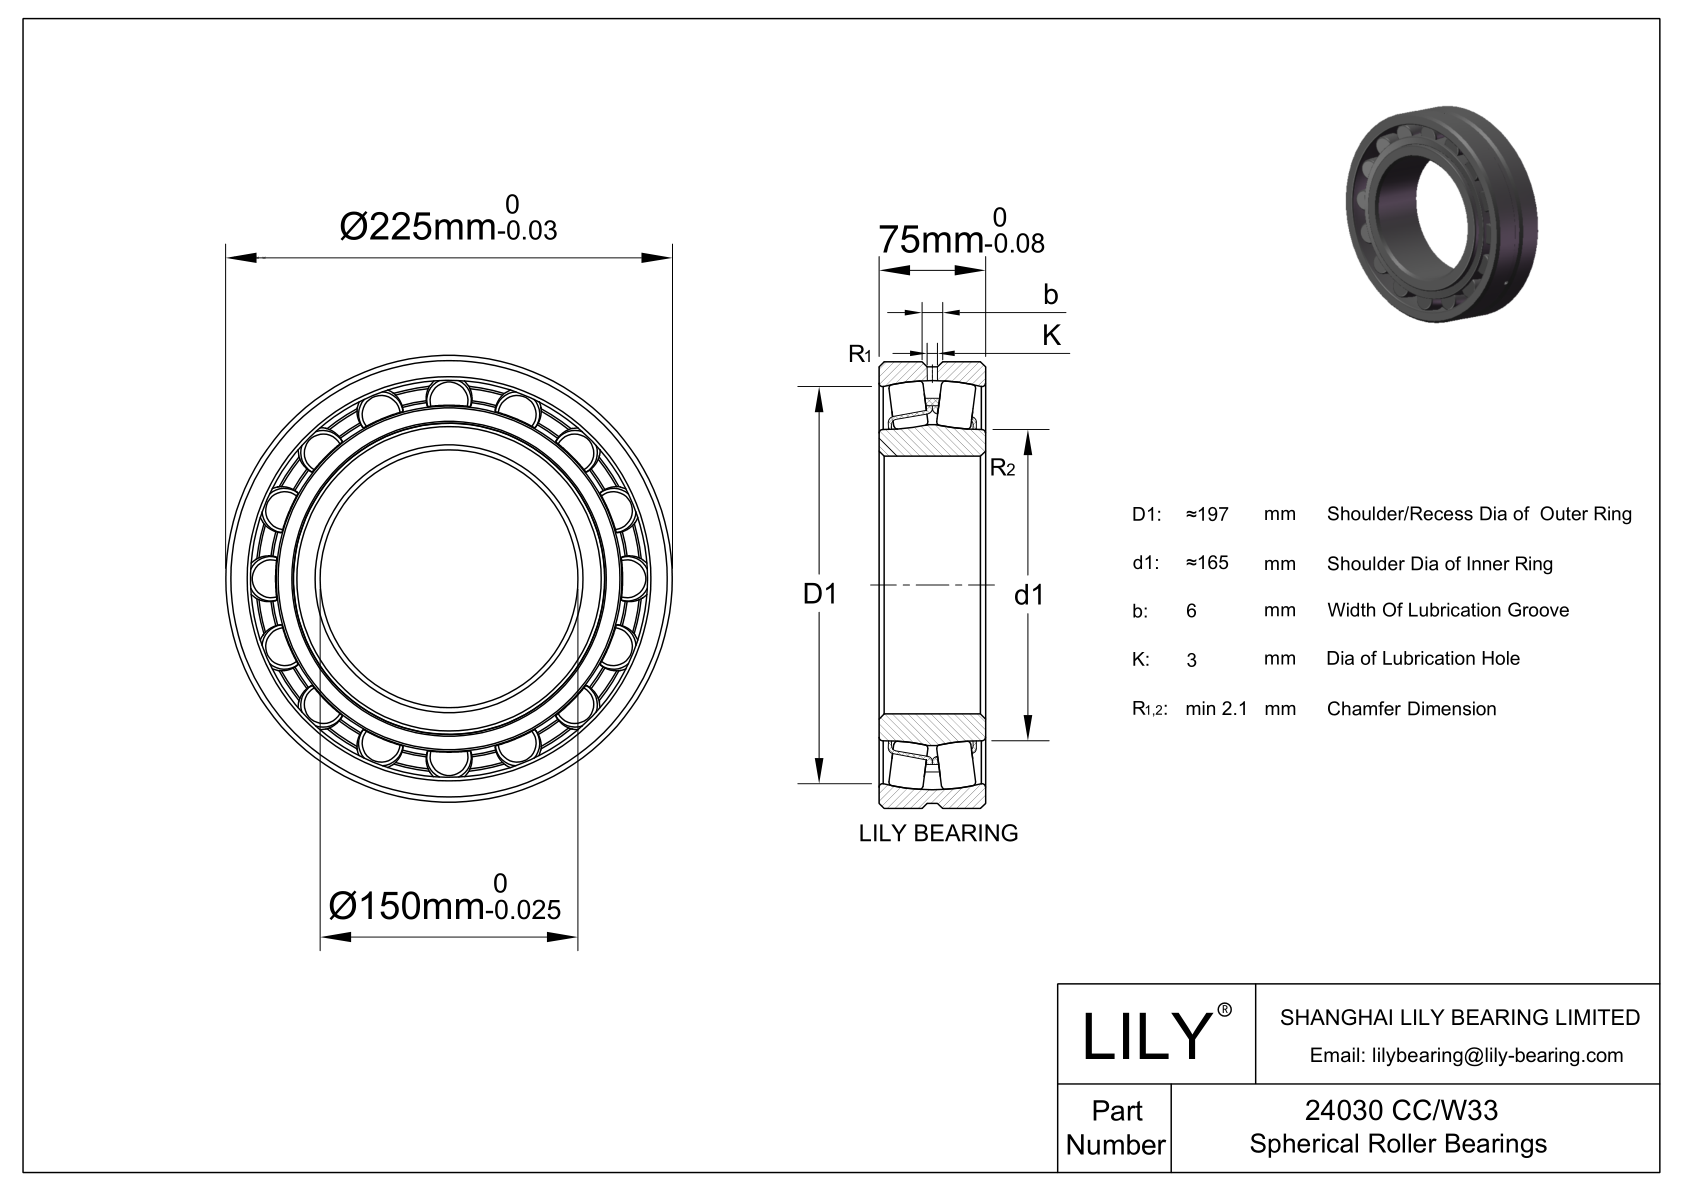 24030 CC/W33 Double Row Spherical Roller Bearing cad drawing